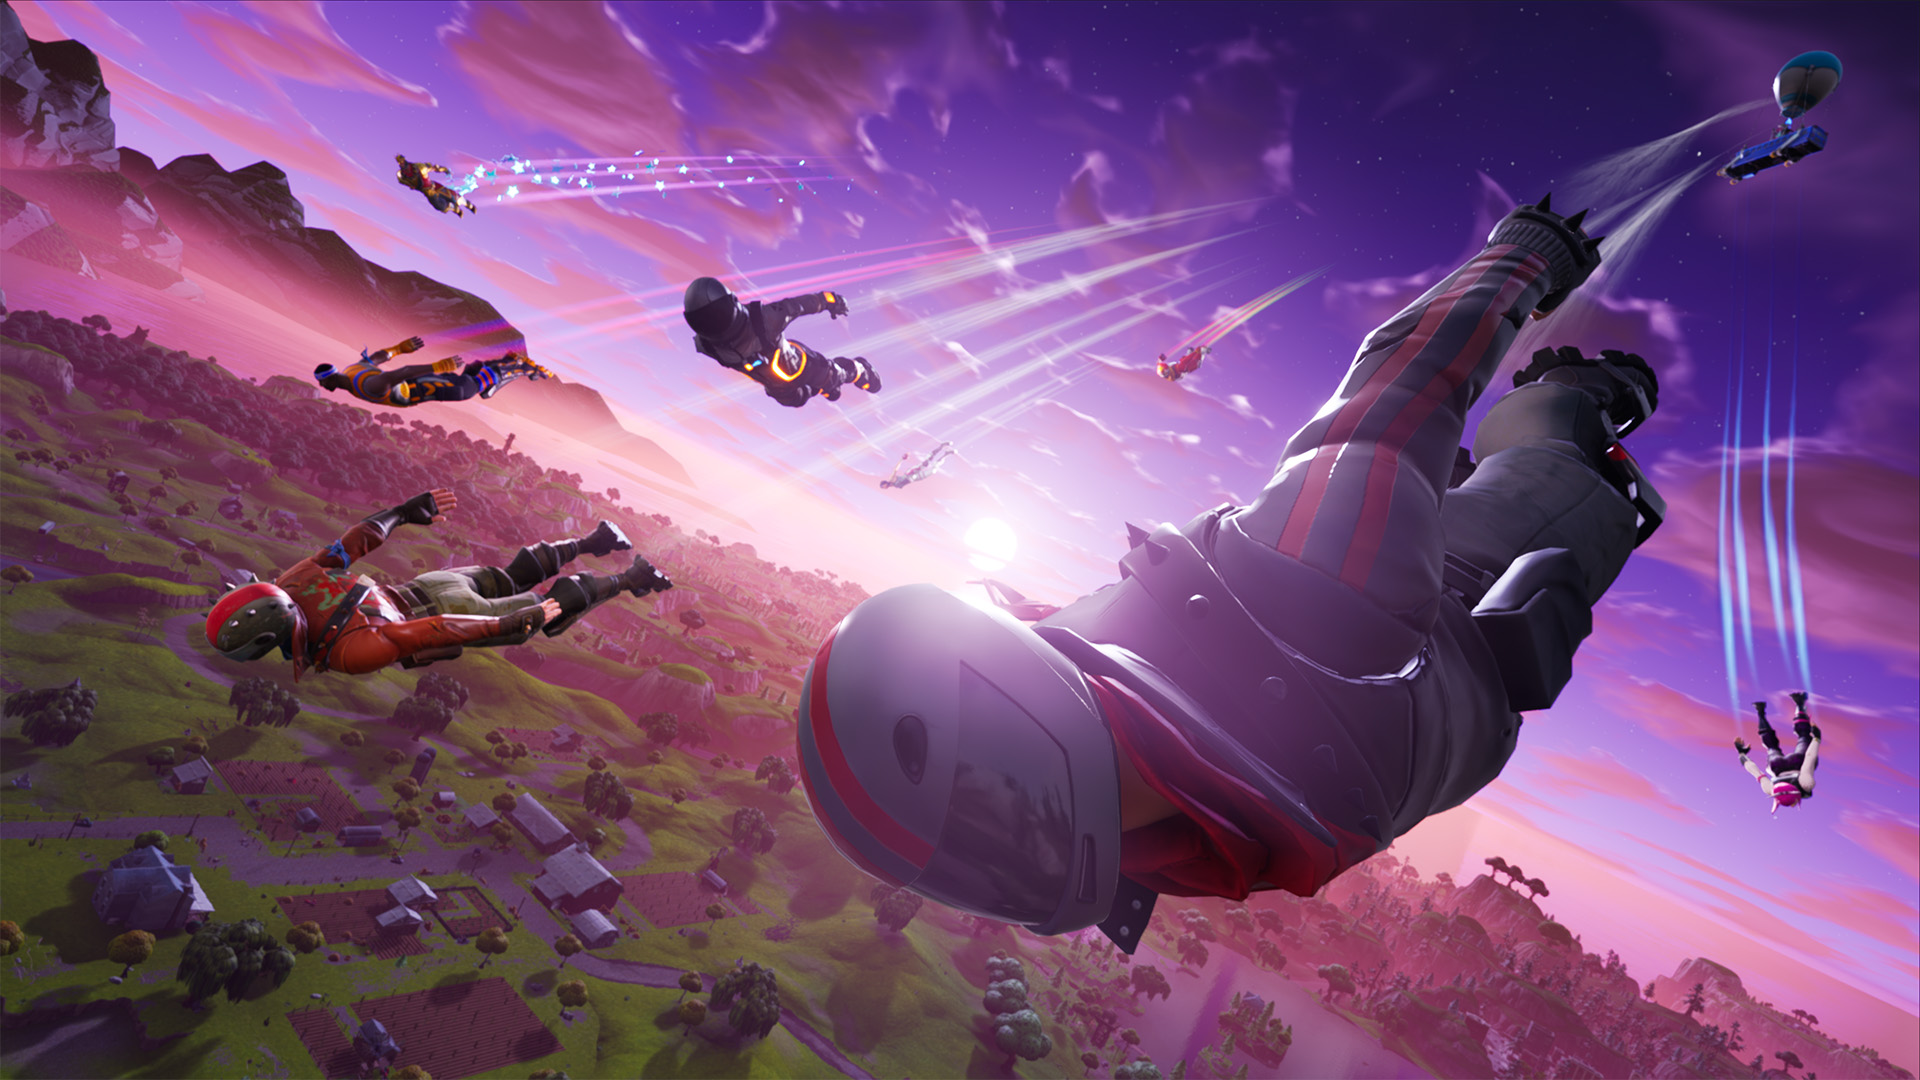 Epic Games executive VP admits that we hope at some